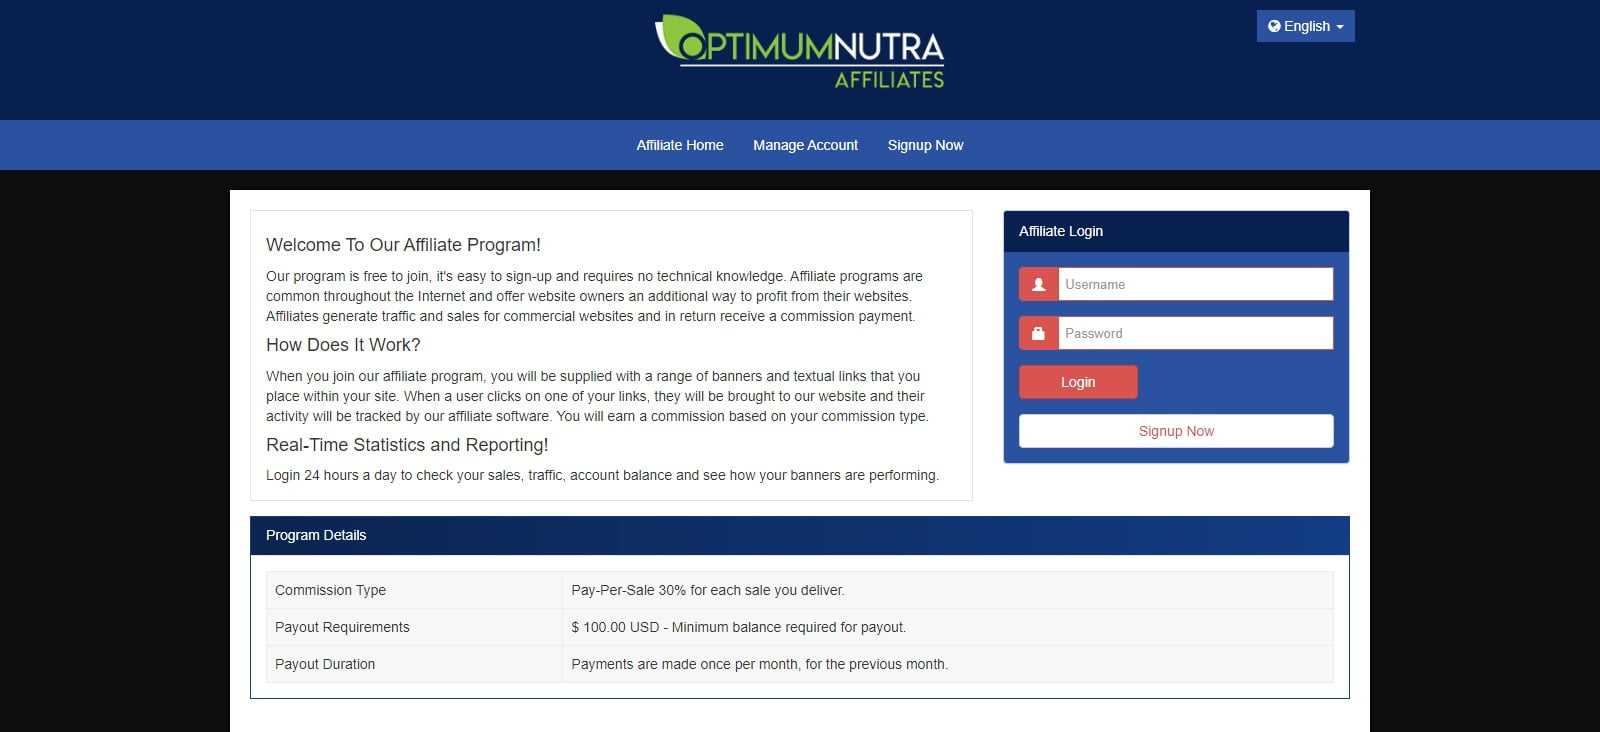 Optimum Nutra Affiliates Program Review: Earn Up To 30% Per Sale